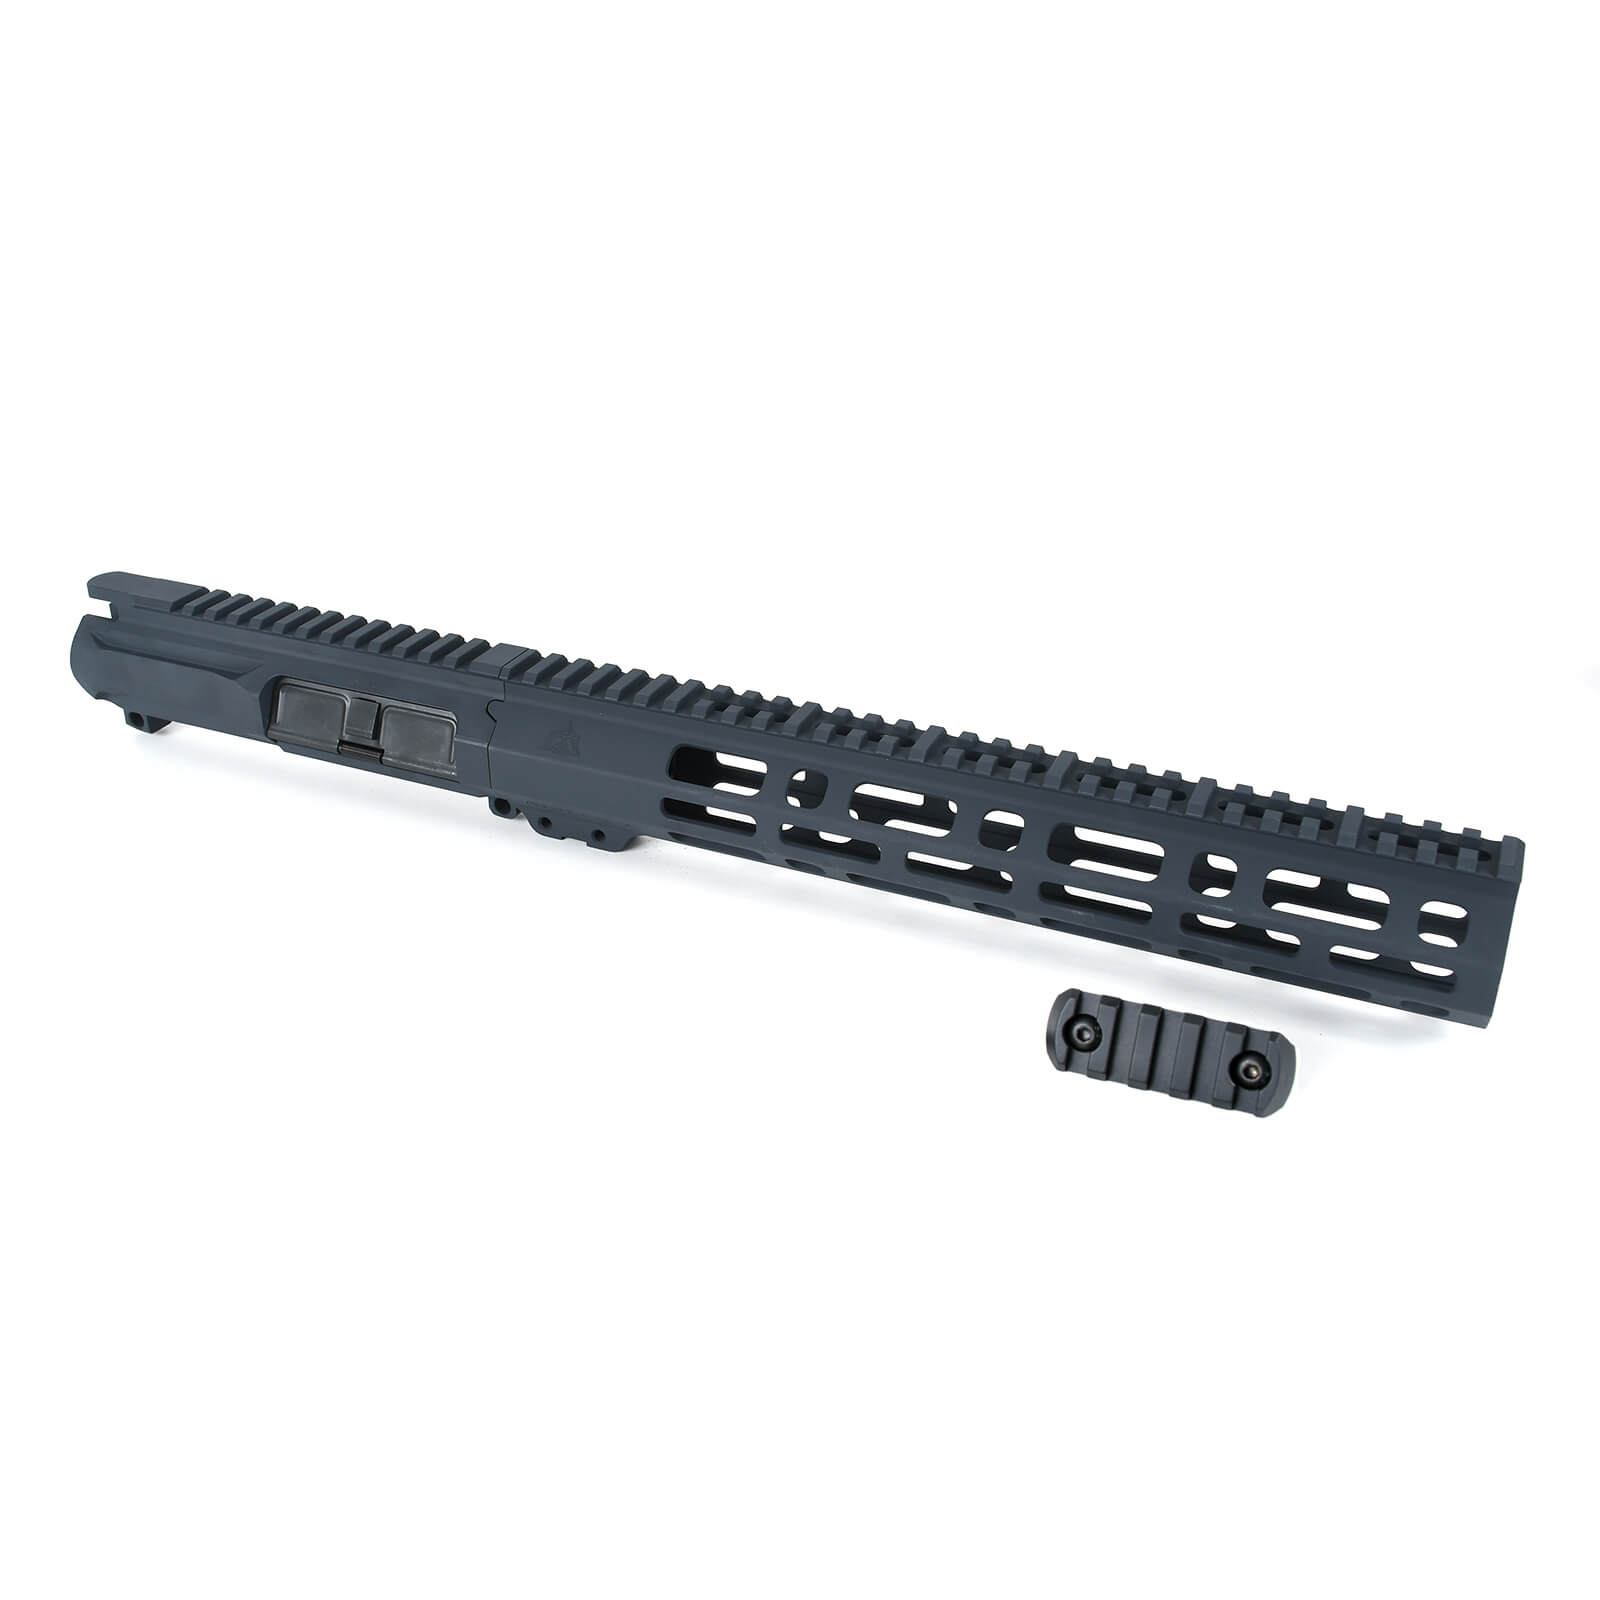 AT3 Tactical Spear M-LOK Free Float Handguard 9 Inch with Slick Side Billet Upper Receiver Grey 12 Inch